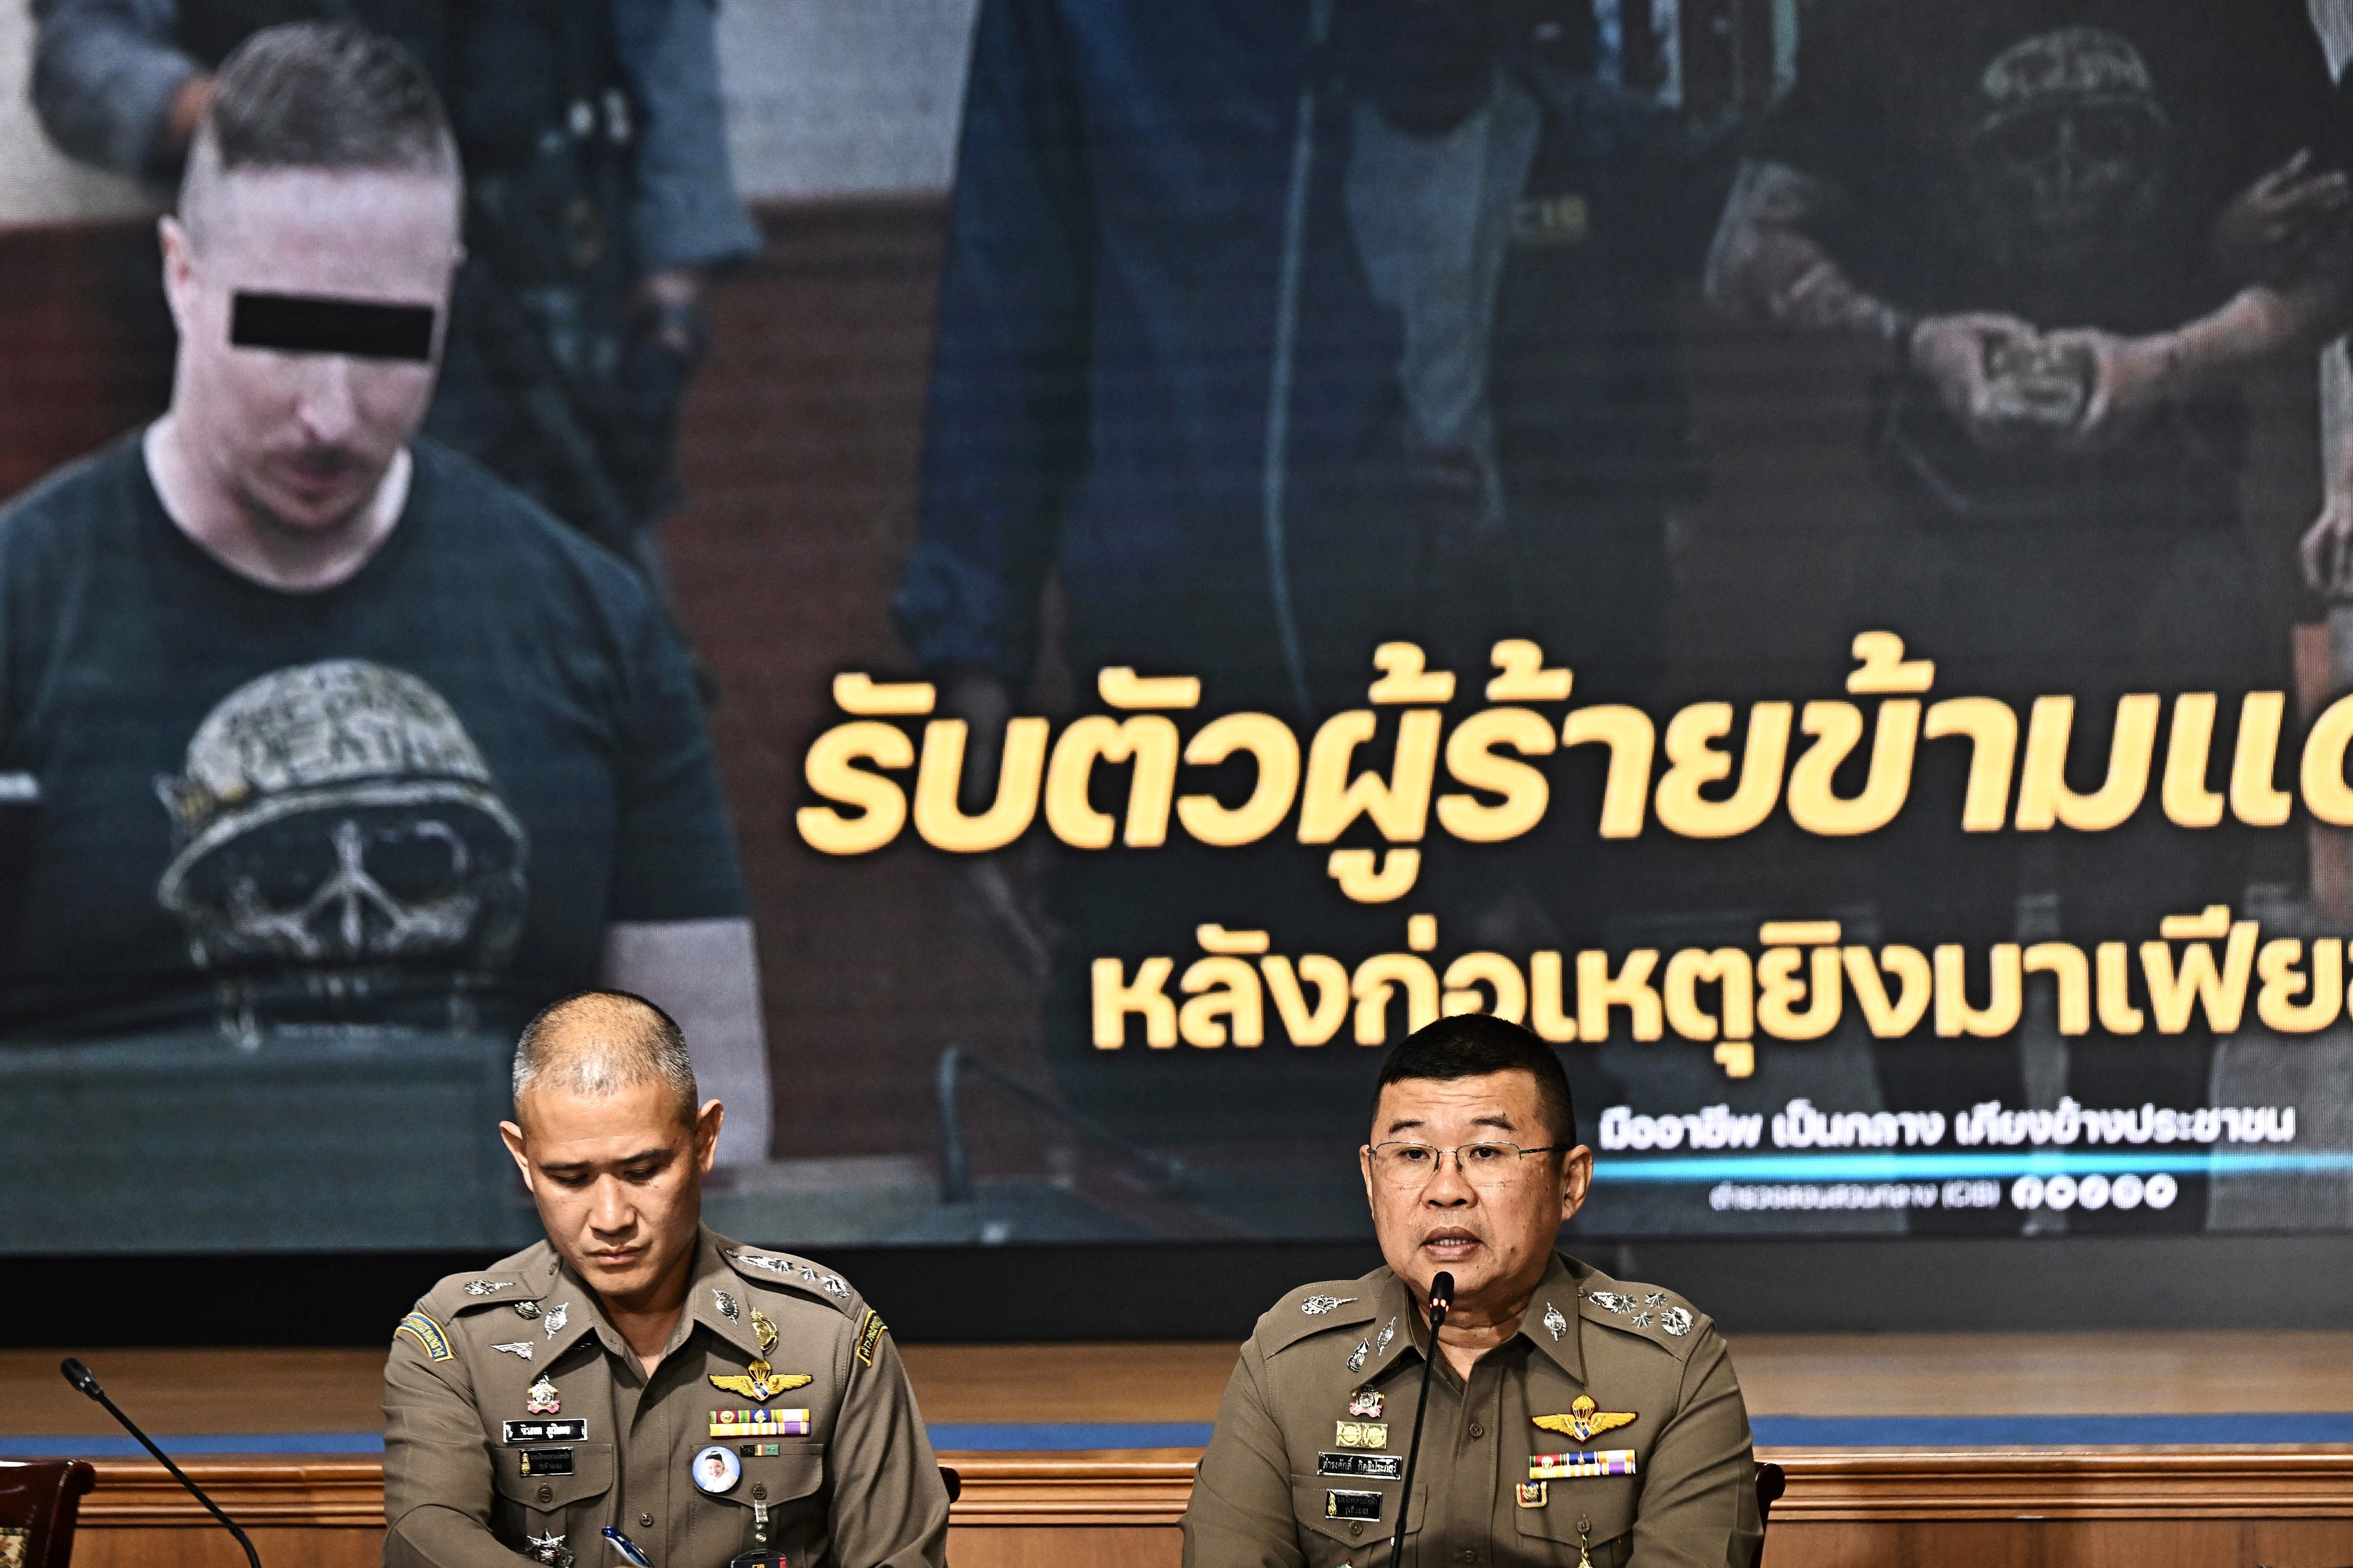 National police chief Damrongsak Kittiprapas (right) speaks during a press conference regarding the extradition of Matthew Dupre (on screen), a Canadian man wanted over the suspected murder of gangster Jimi ‘Slice’ Sandhu in Phuket on 4 February 2022, at the Crime Suppression Division in Bangkok, Thailand on 29 May 2023